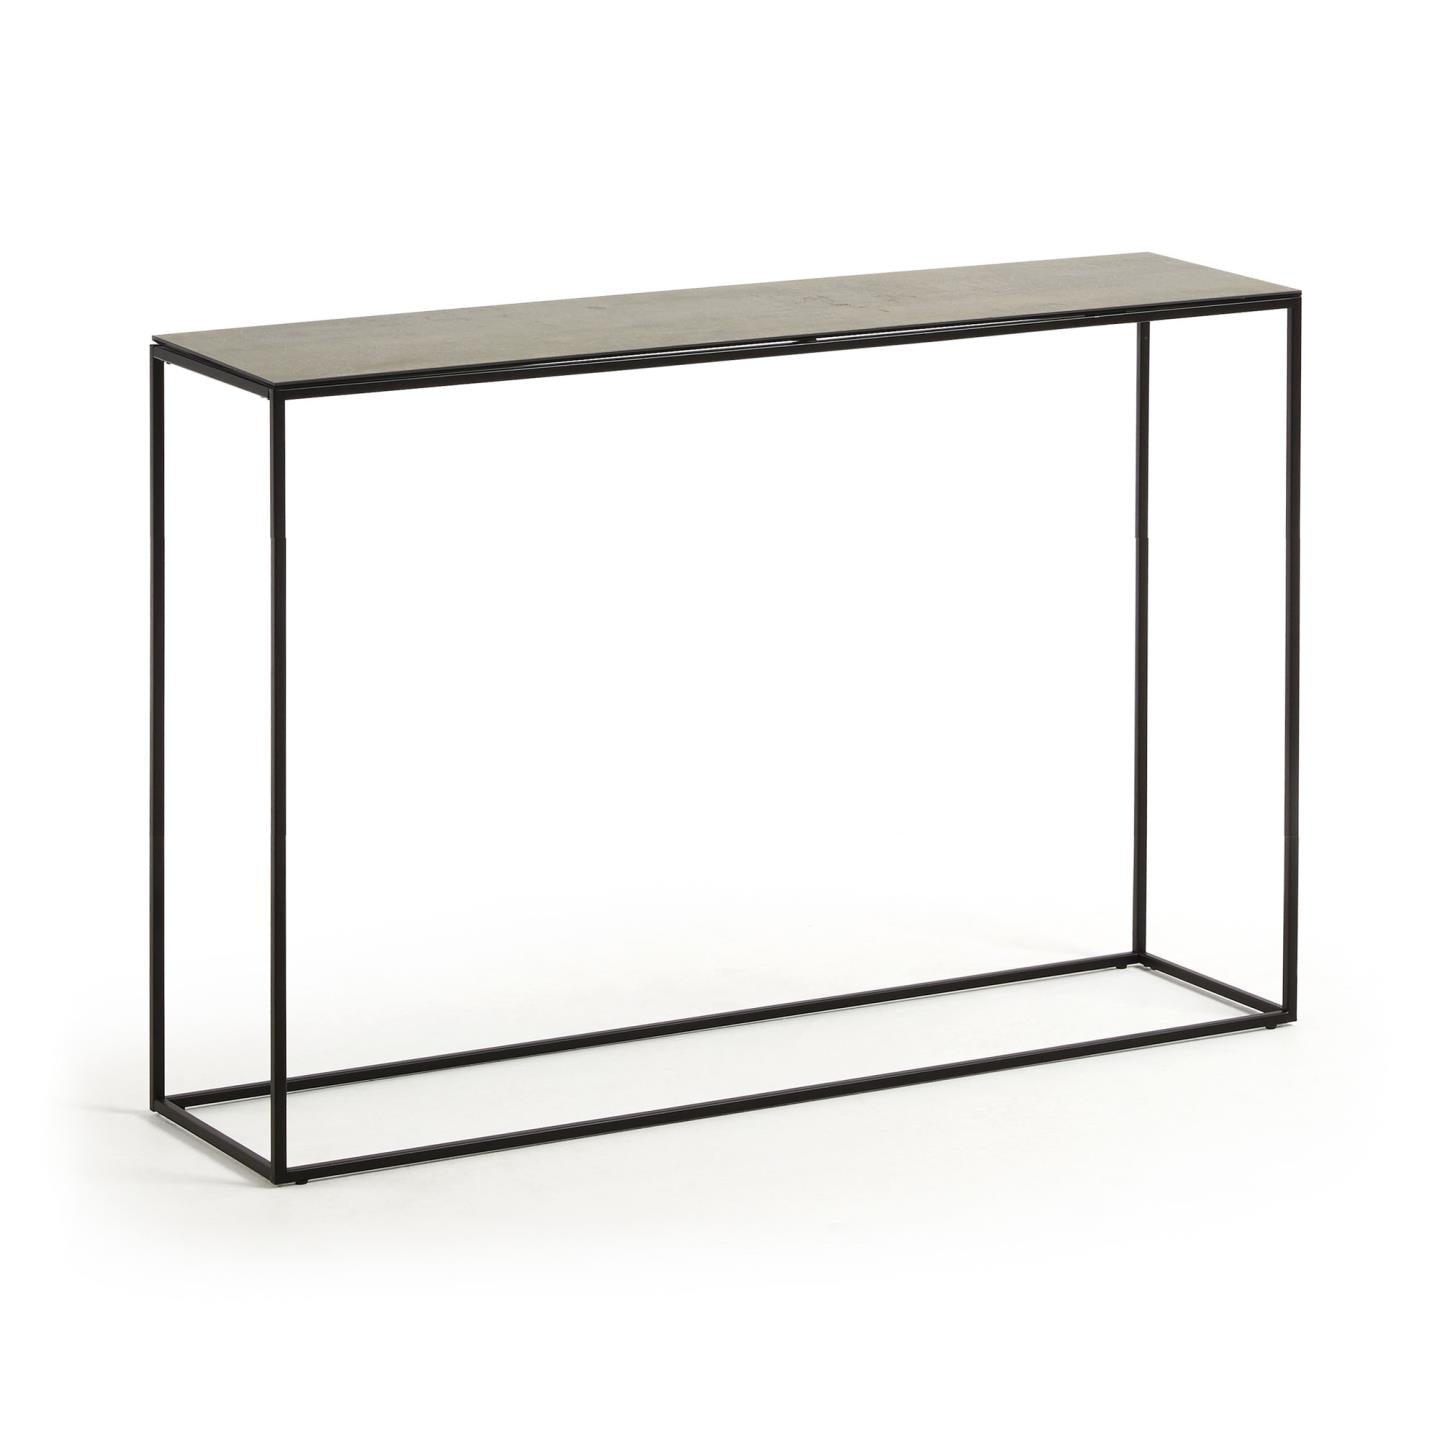 Rewena console table with porcelain top and steel structure, 110 x 75 cm